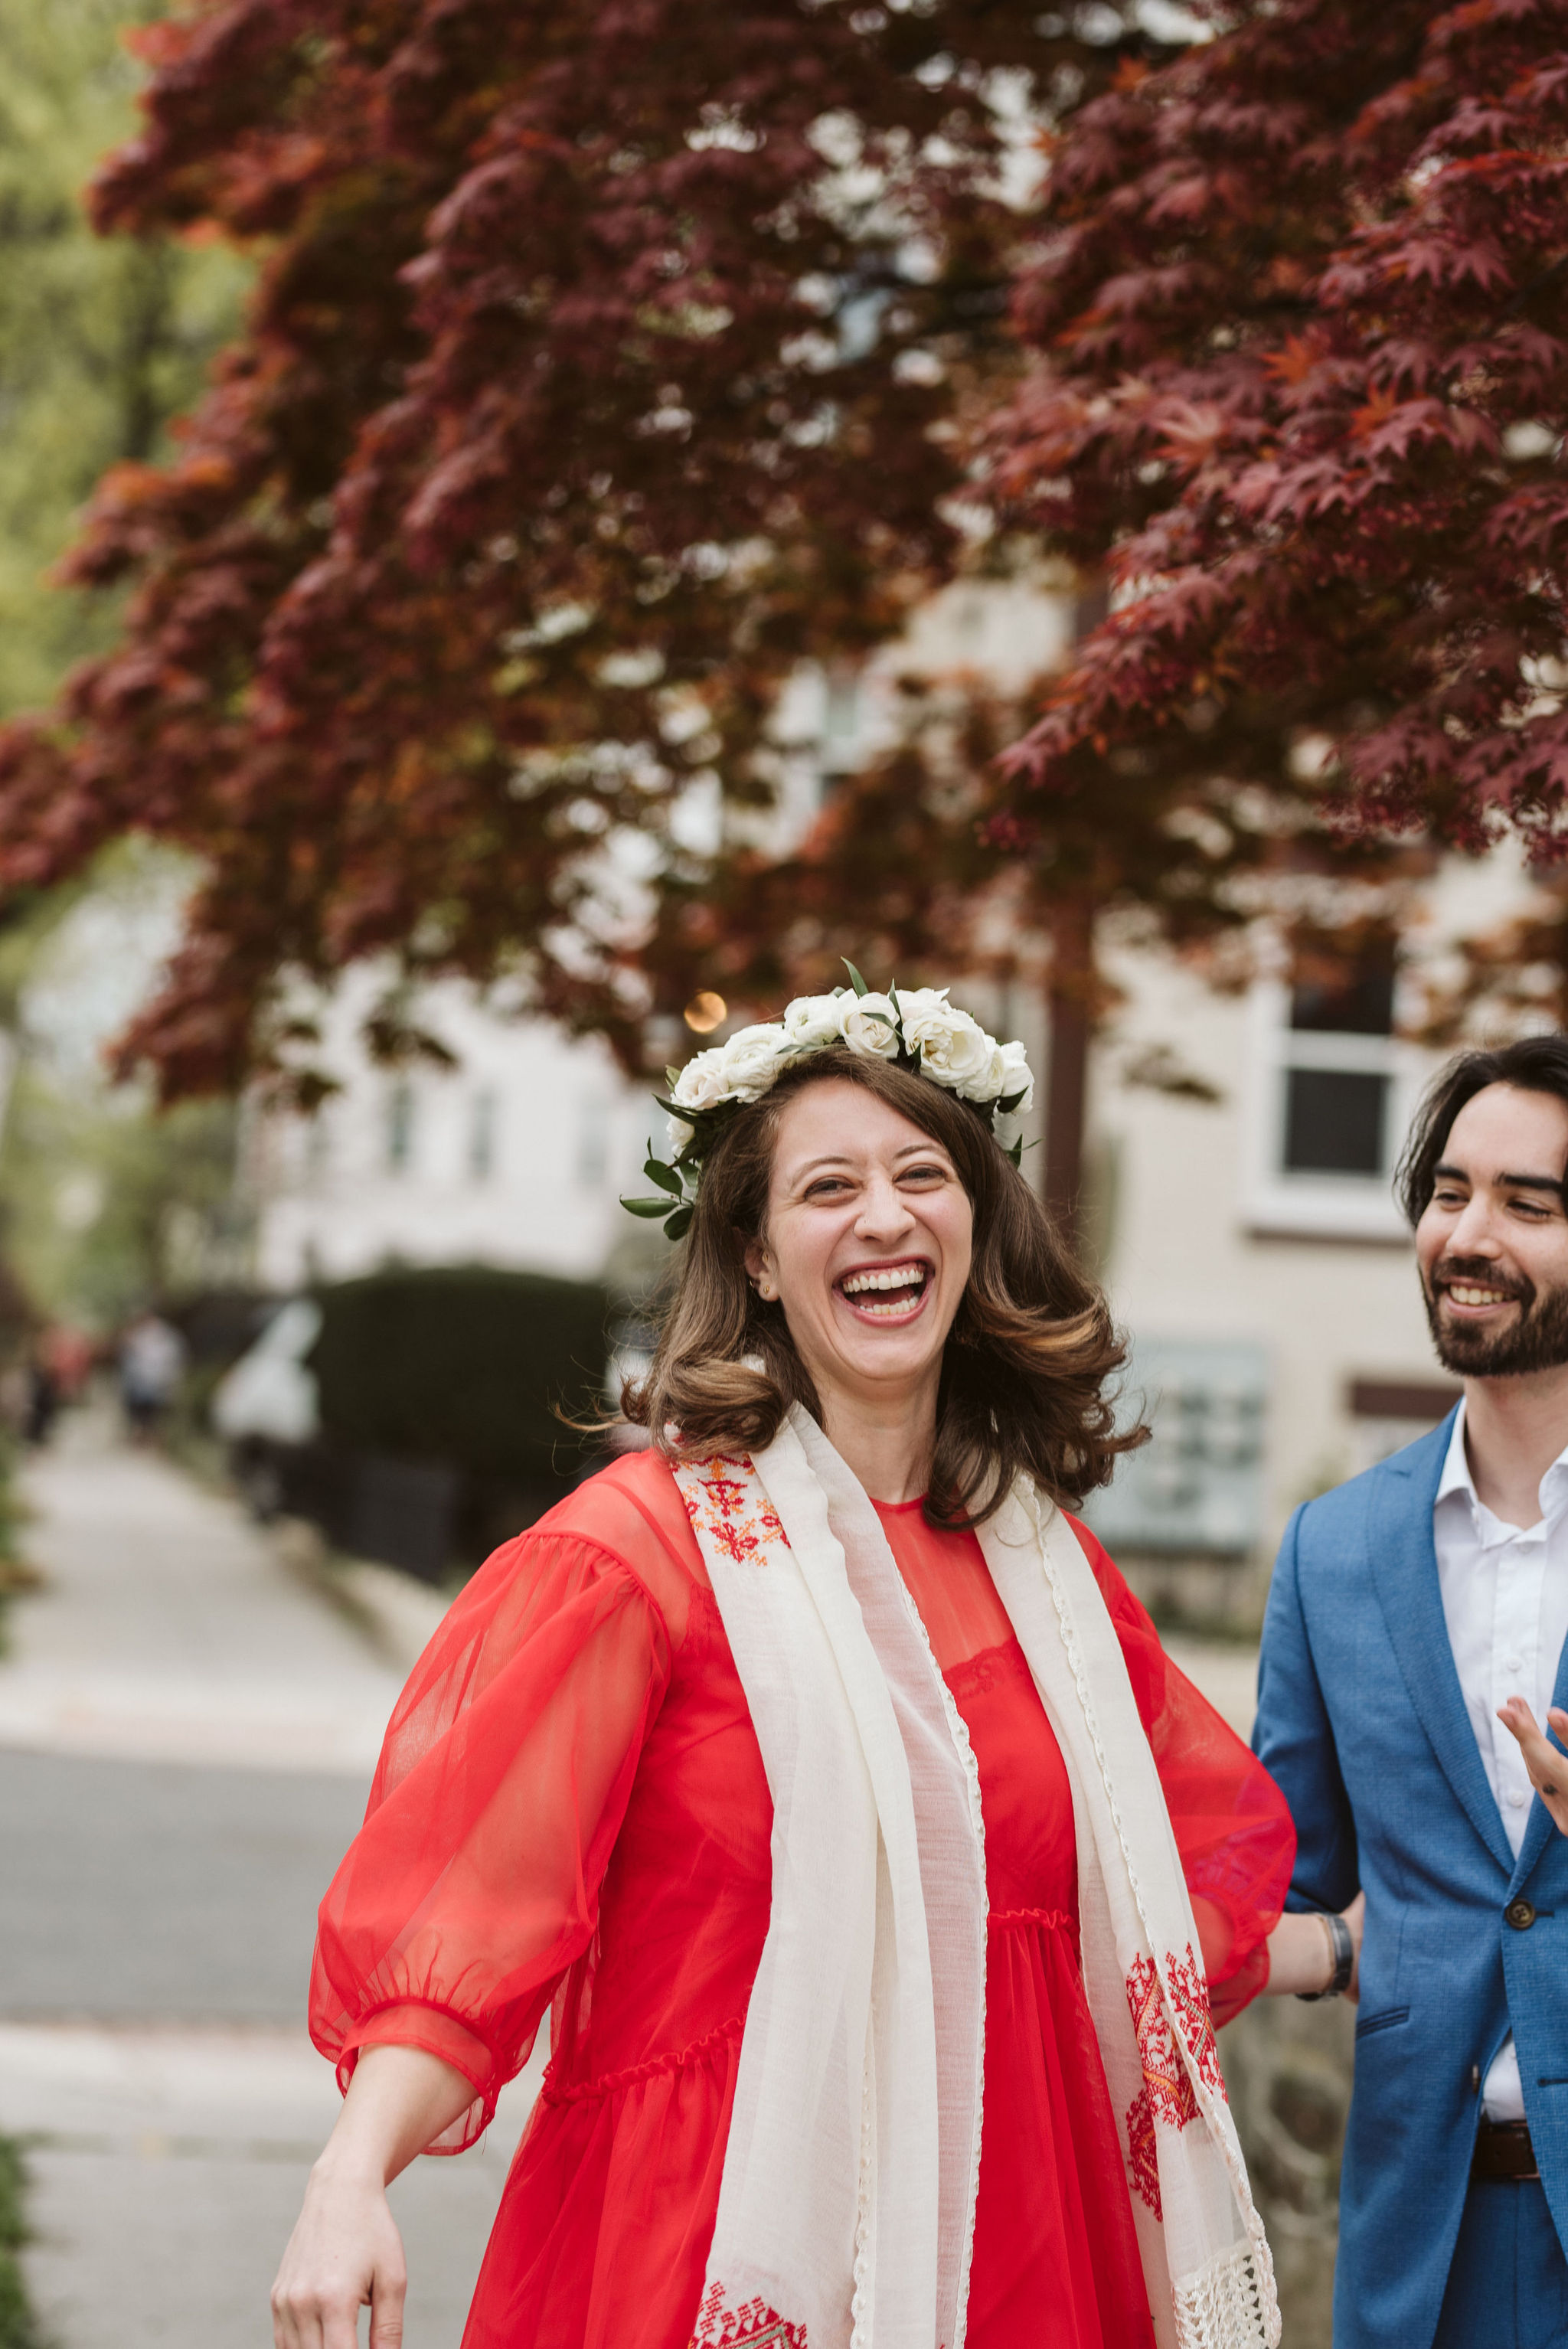  Washington DC, Baltimore Wedding Photographer, Intimate Wedding, Traditional, Classic, Palestinian, Bride and groom Laughing and Holding Hands, White Rose Flower Crown, Blue Suit, Red Dress 